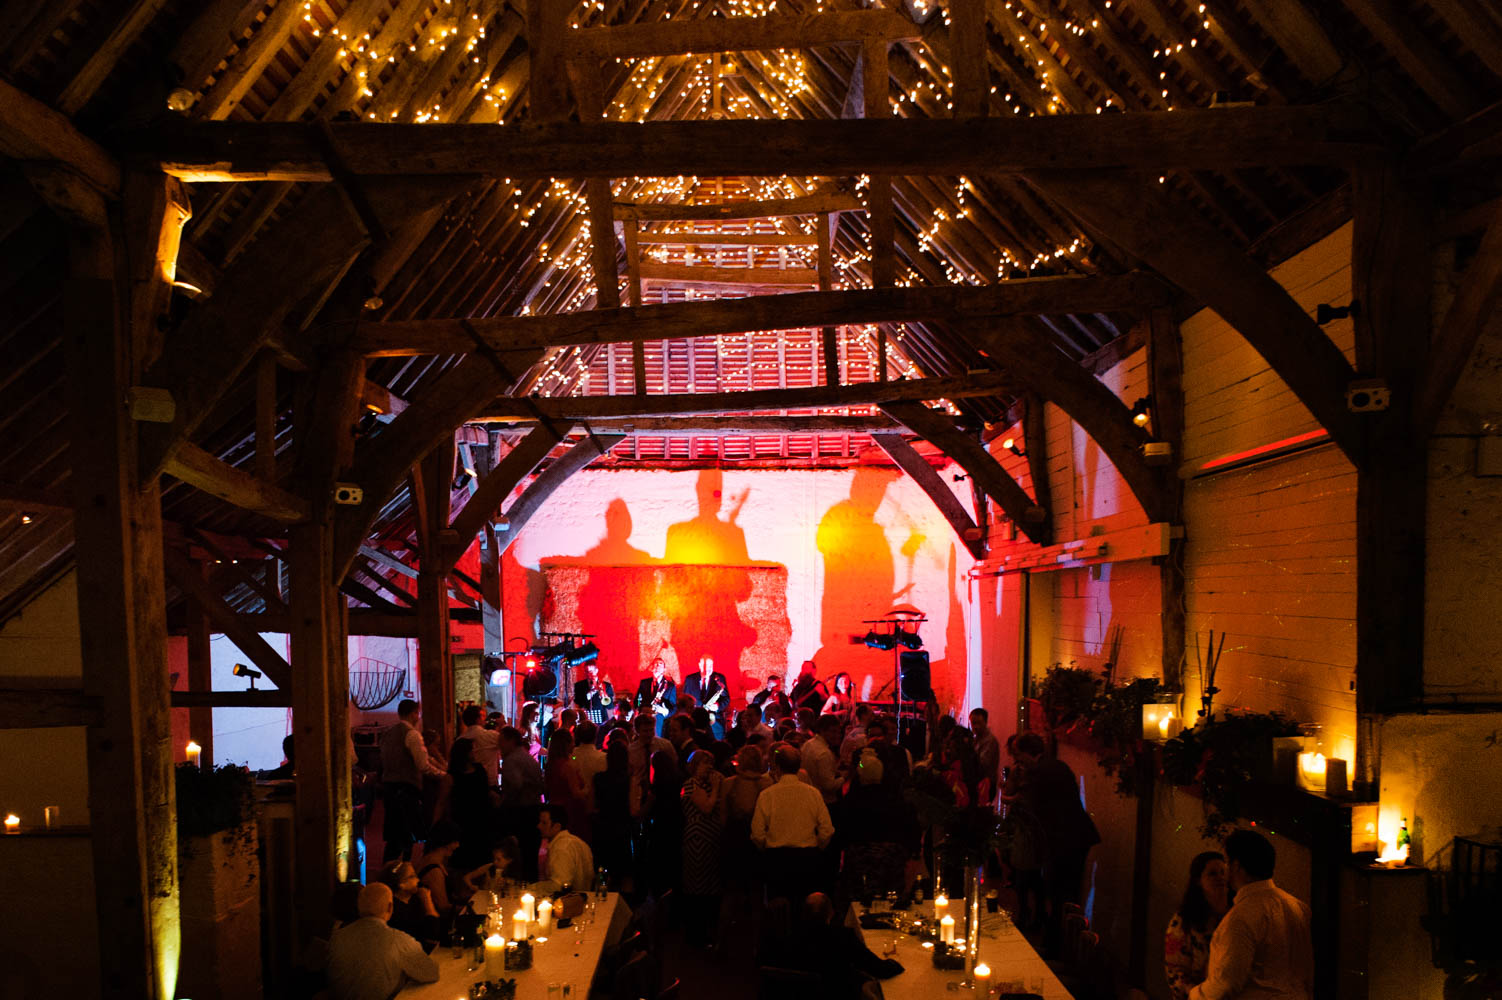 Live band at Pangdean Old Barn wedding reception by Brighton documentary wedding photographer James Robertshaw